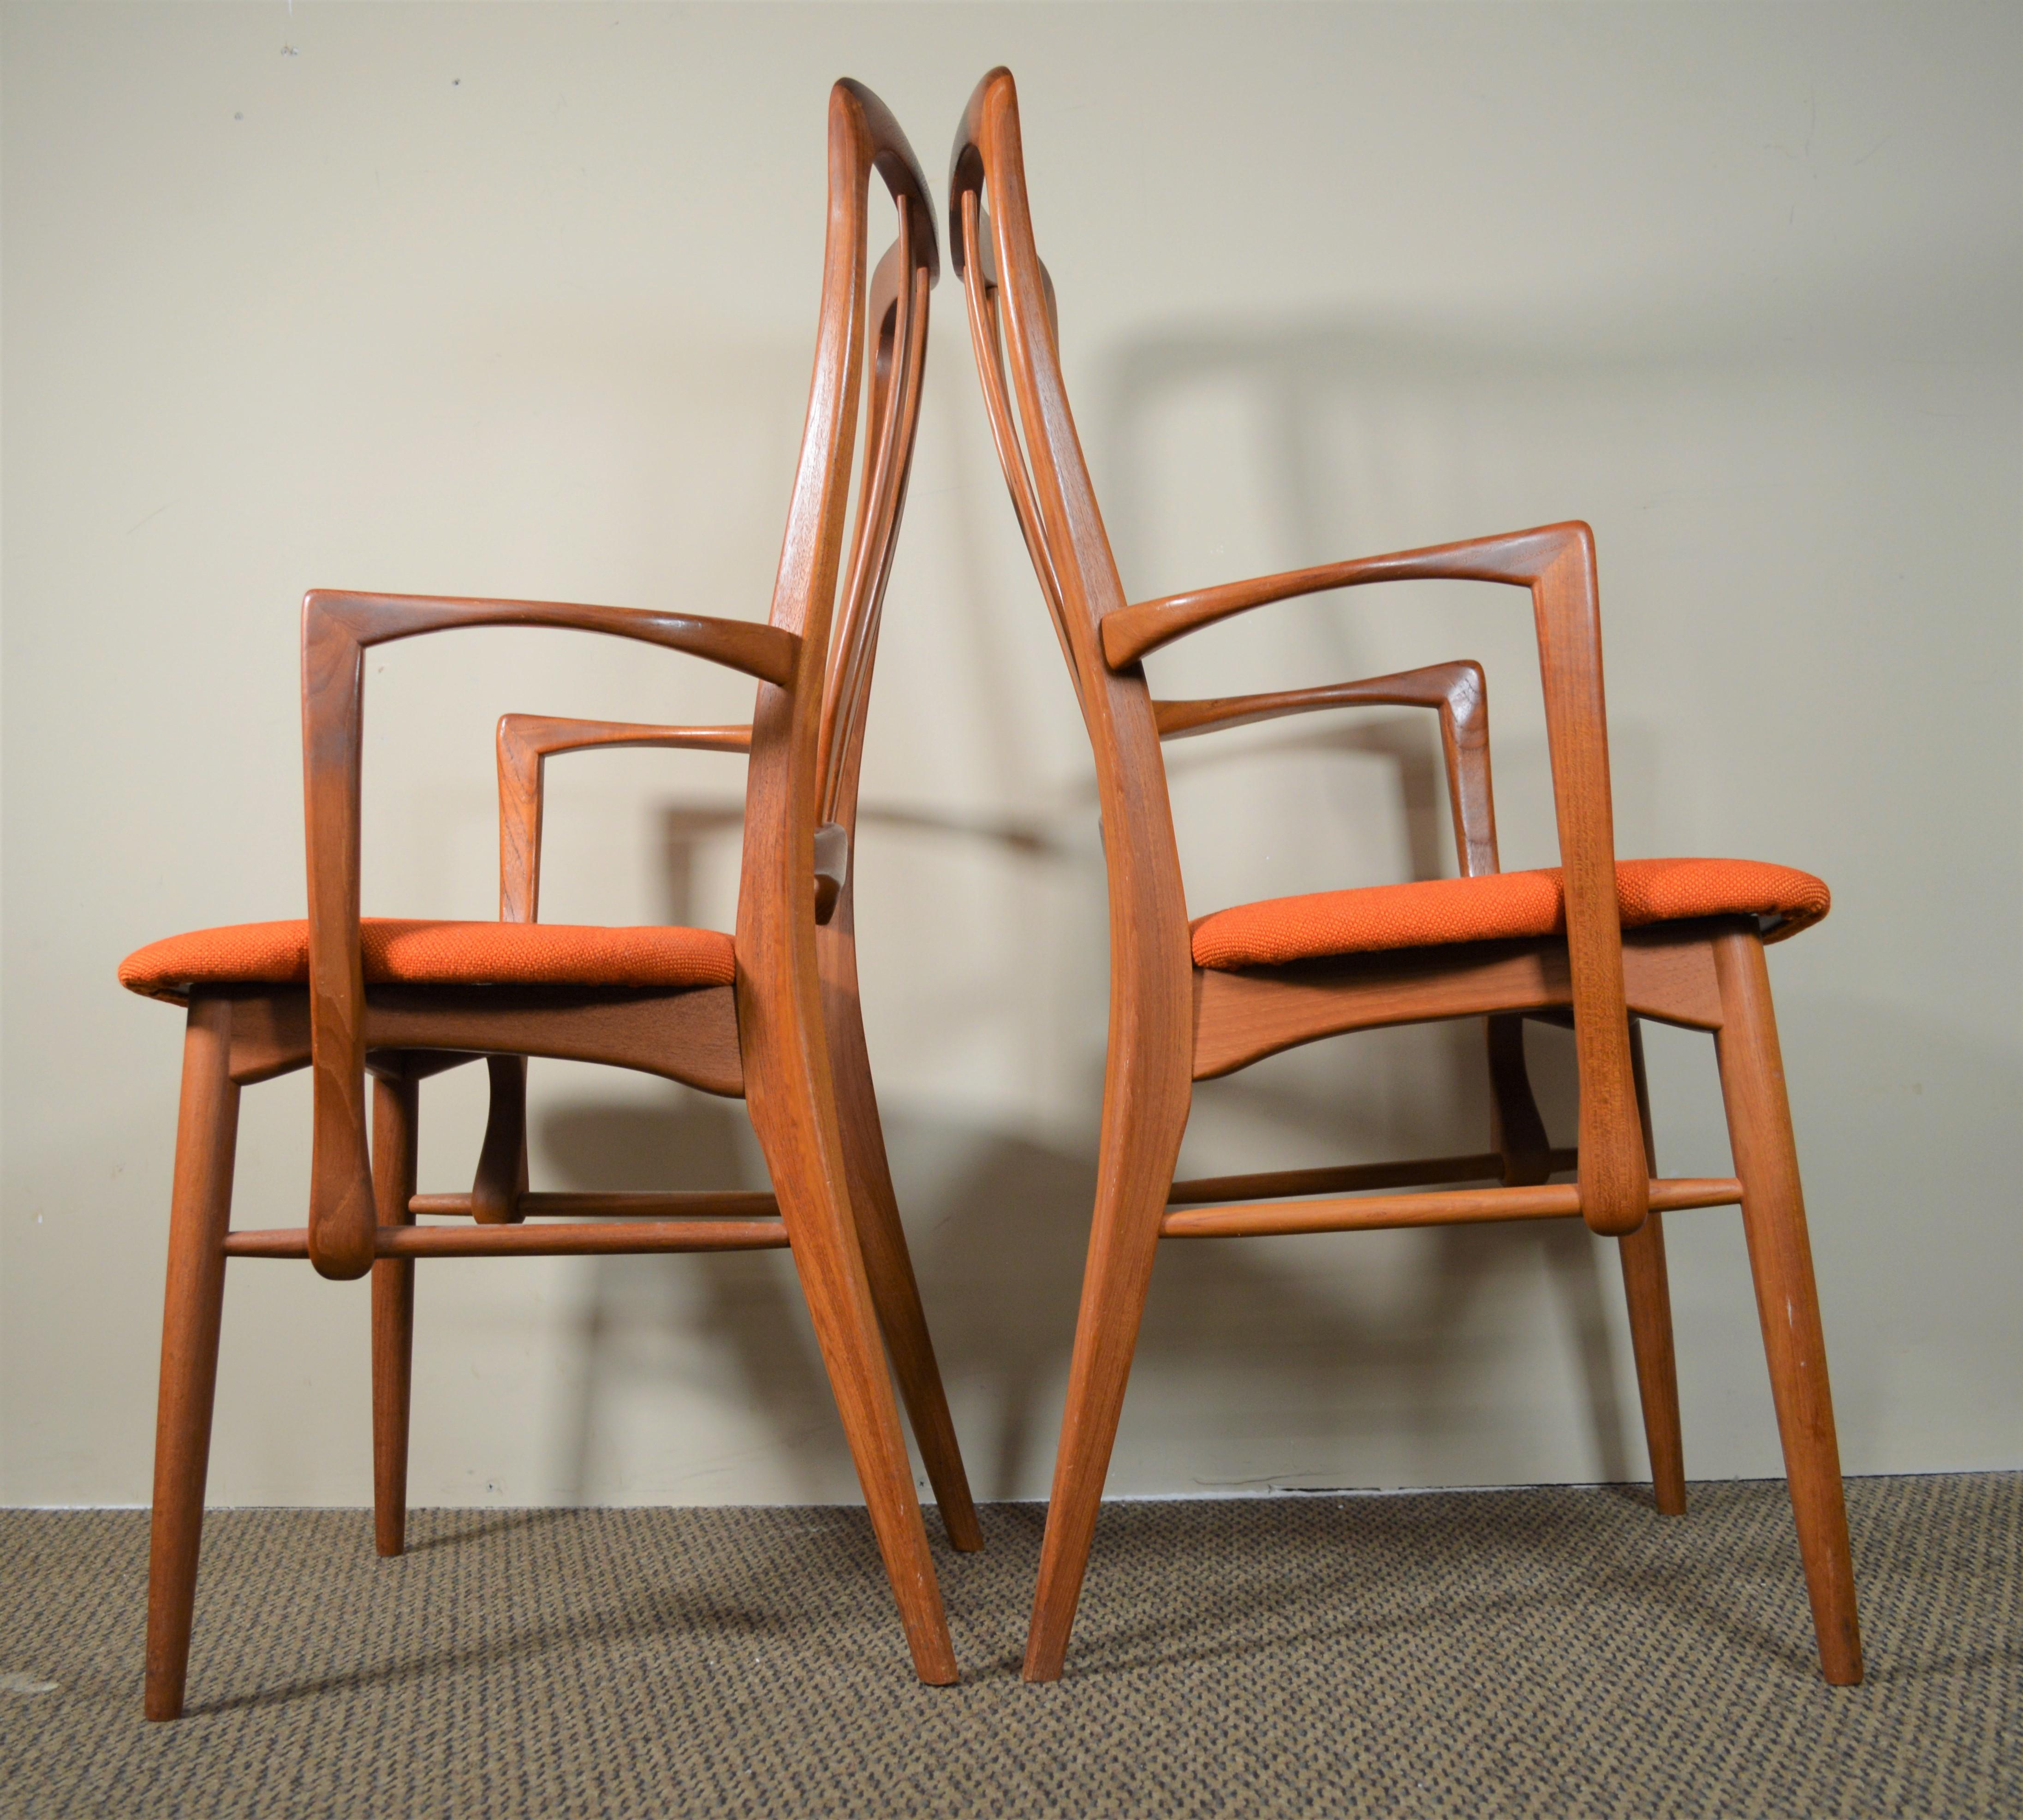 This is a pair of Danish teak dining chairs with arms. Called Ingrid chairs designed in the 1960s by Niels Koefoeds. Made in Denmark. New orange wool upholstery.

Very good condition. The chairs have been reupholstered. The teak frames are in very